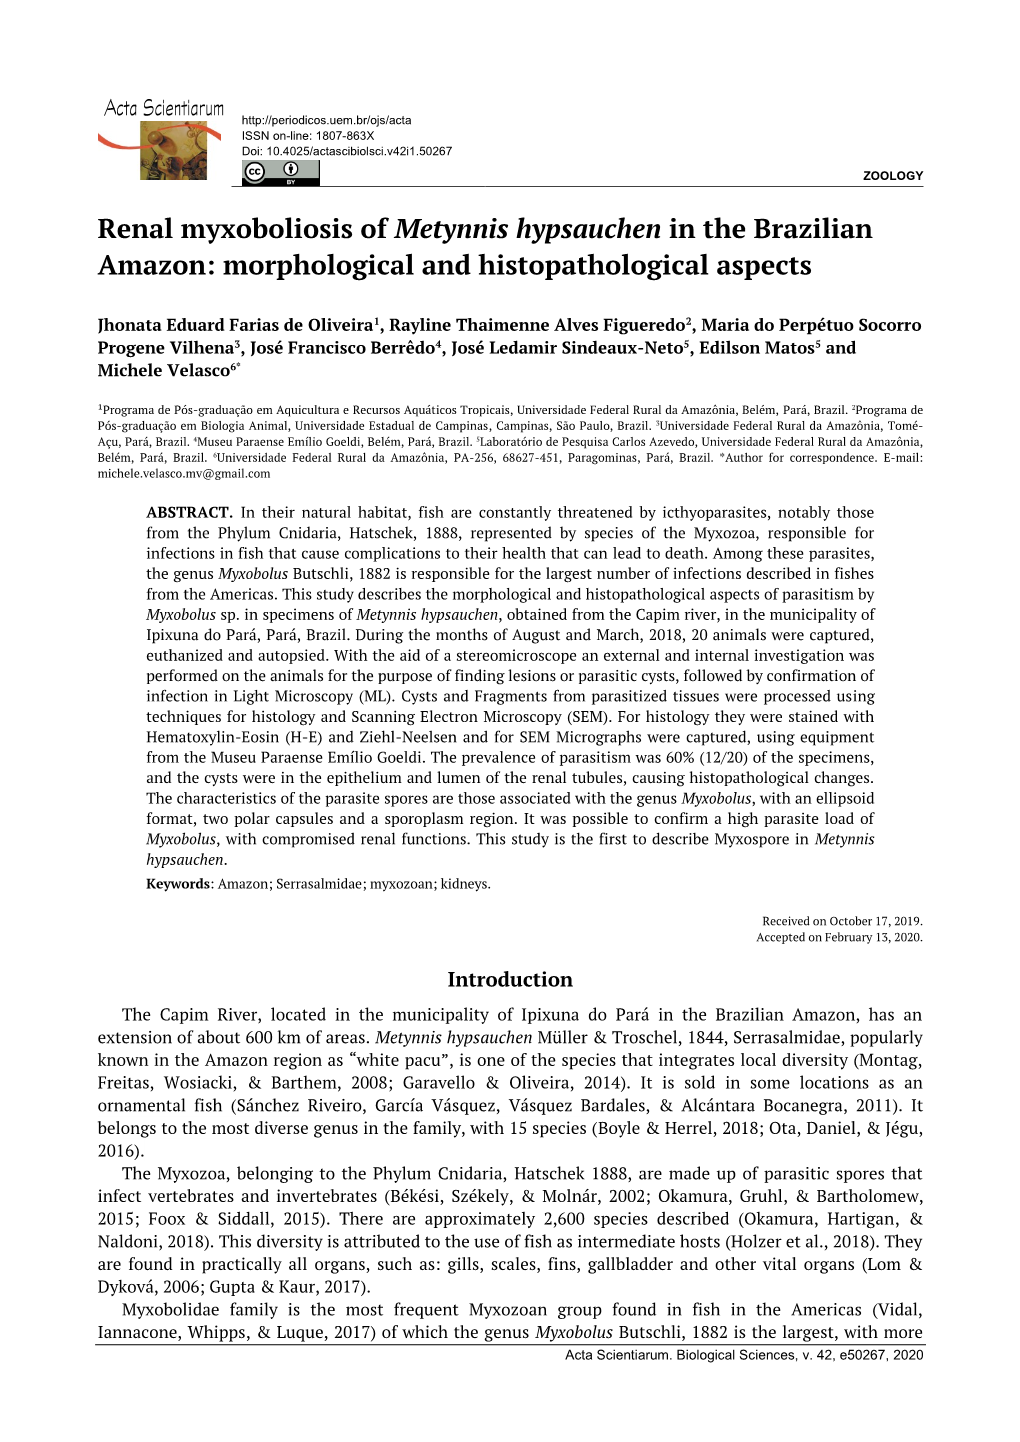 Renal Myxoboliosis of Metynnis Hypsauchen in the Brazilian Amazon: Morphological and Histopathological Aspects